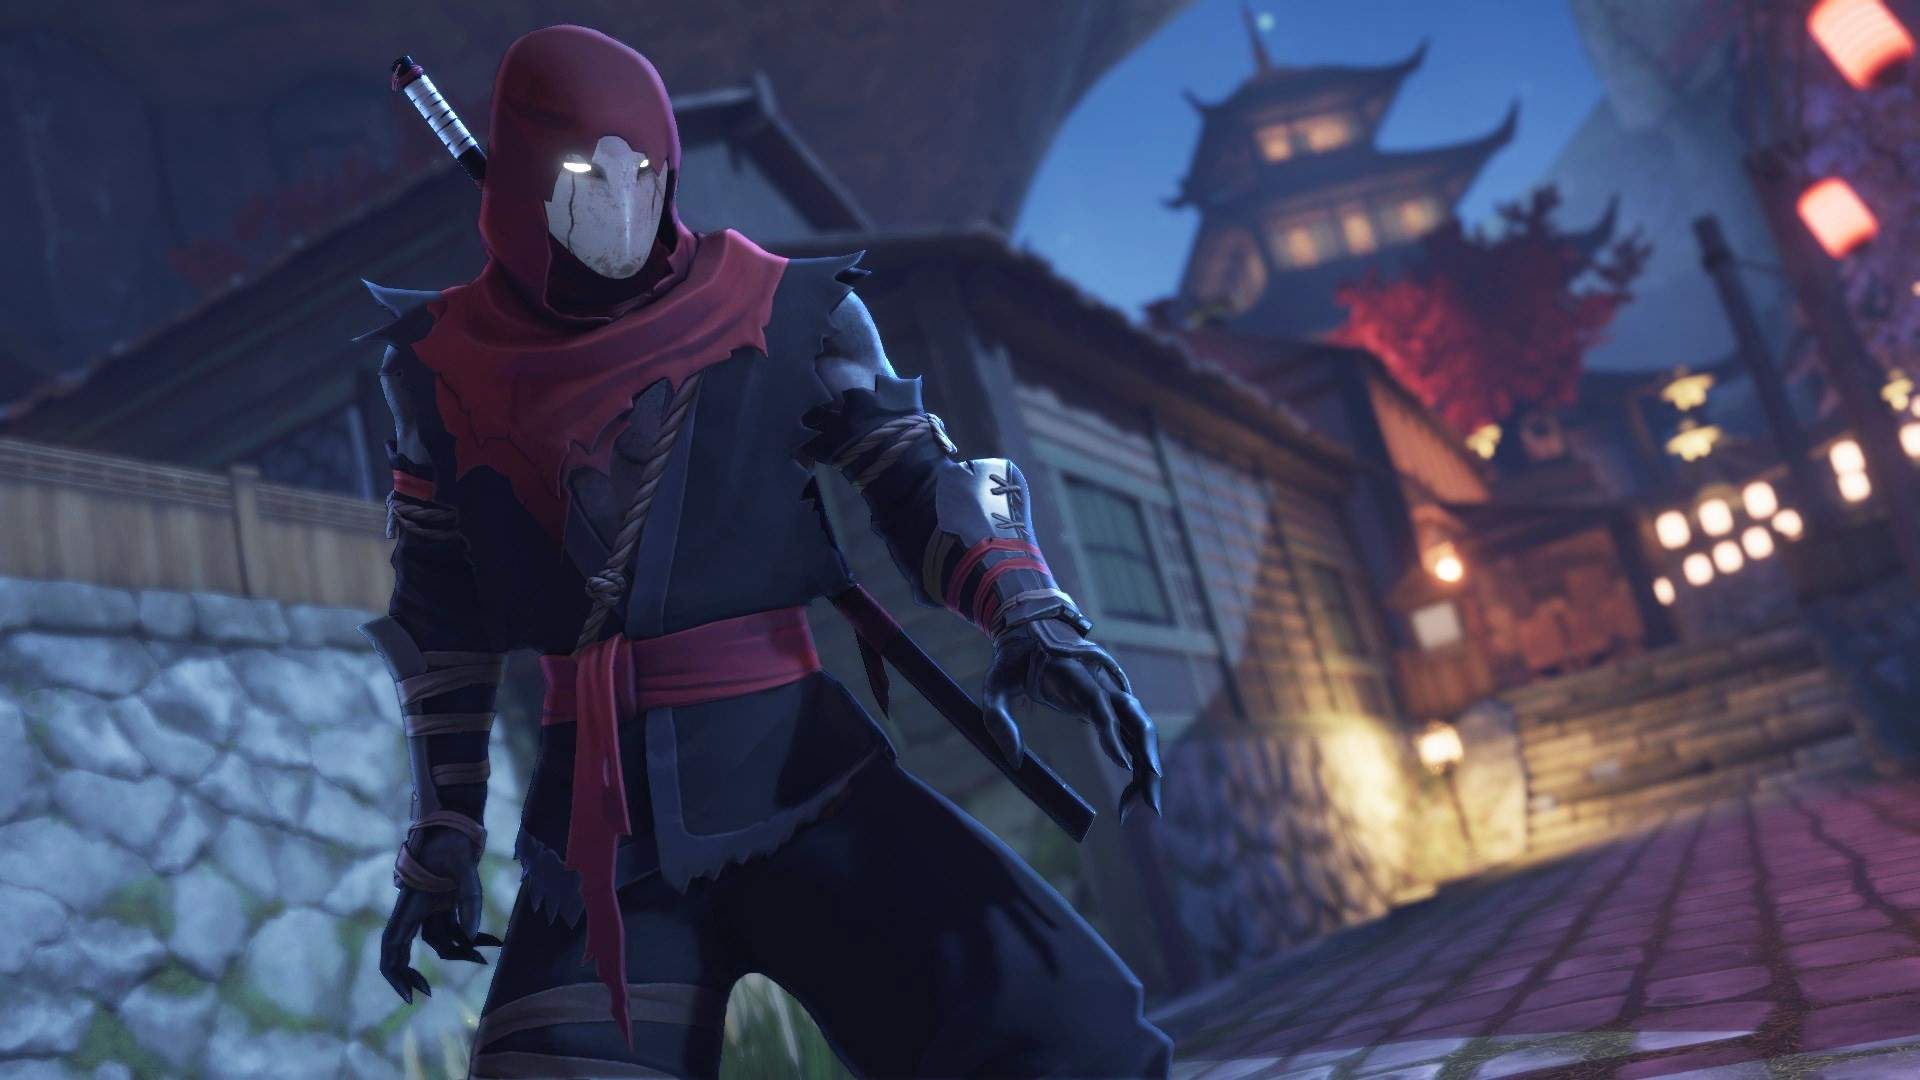 Aragami 2 – September 17 - Optimized for Xbox Series X|S ● Smart Delivery